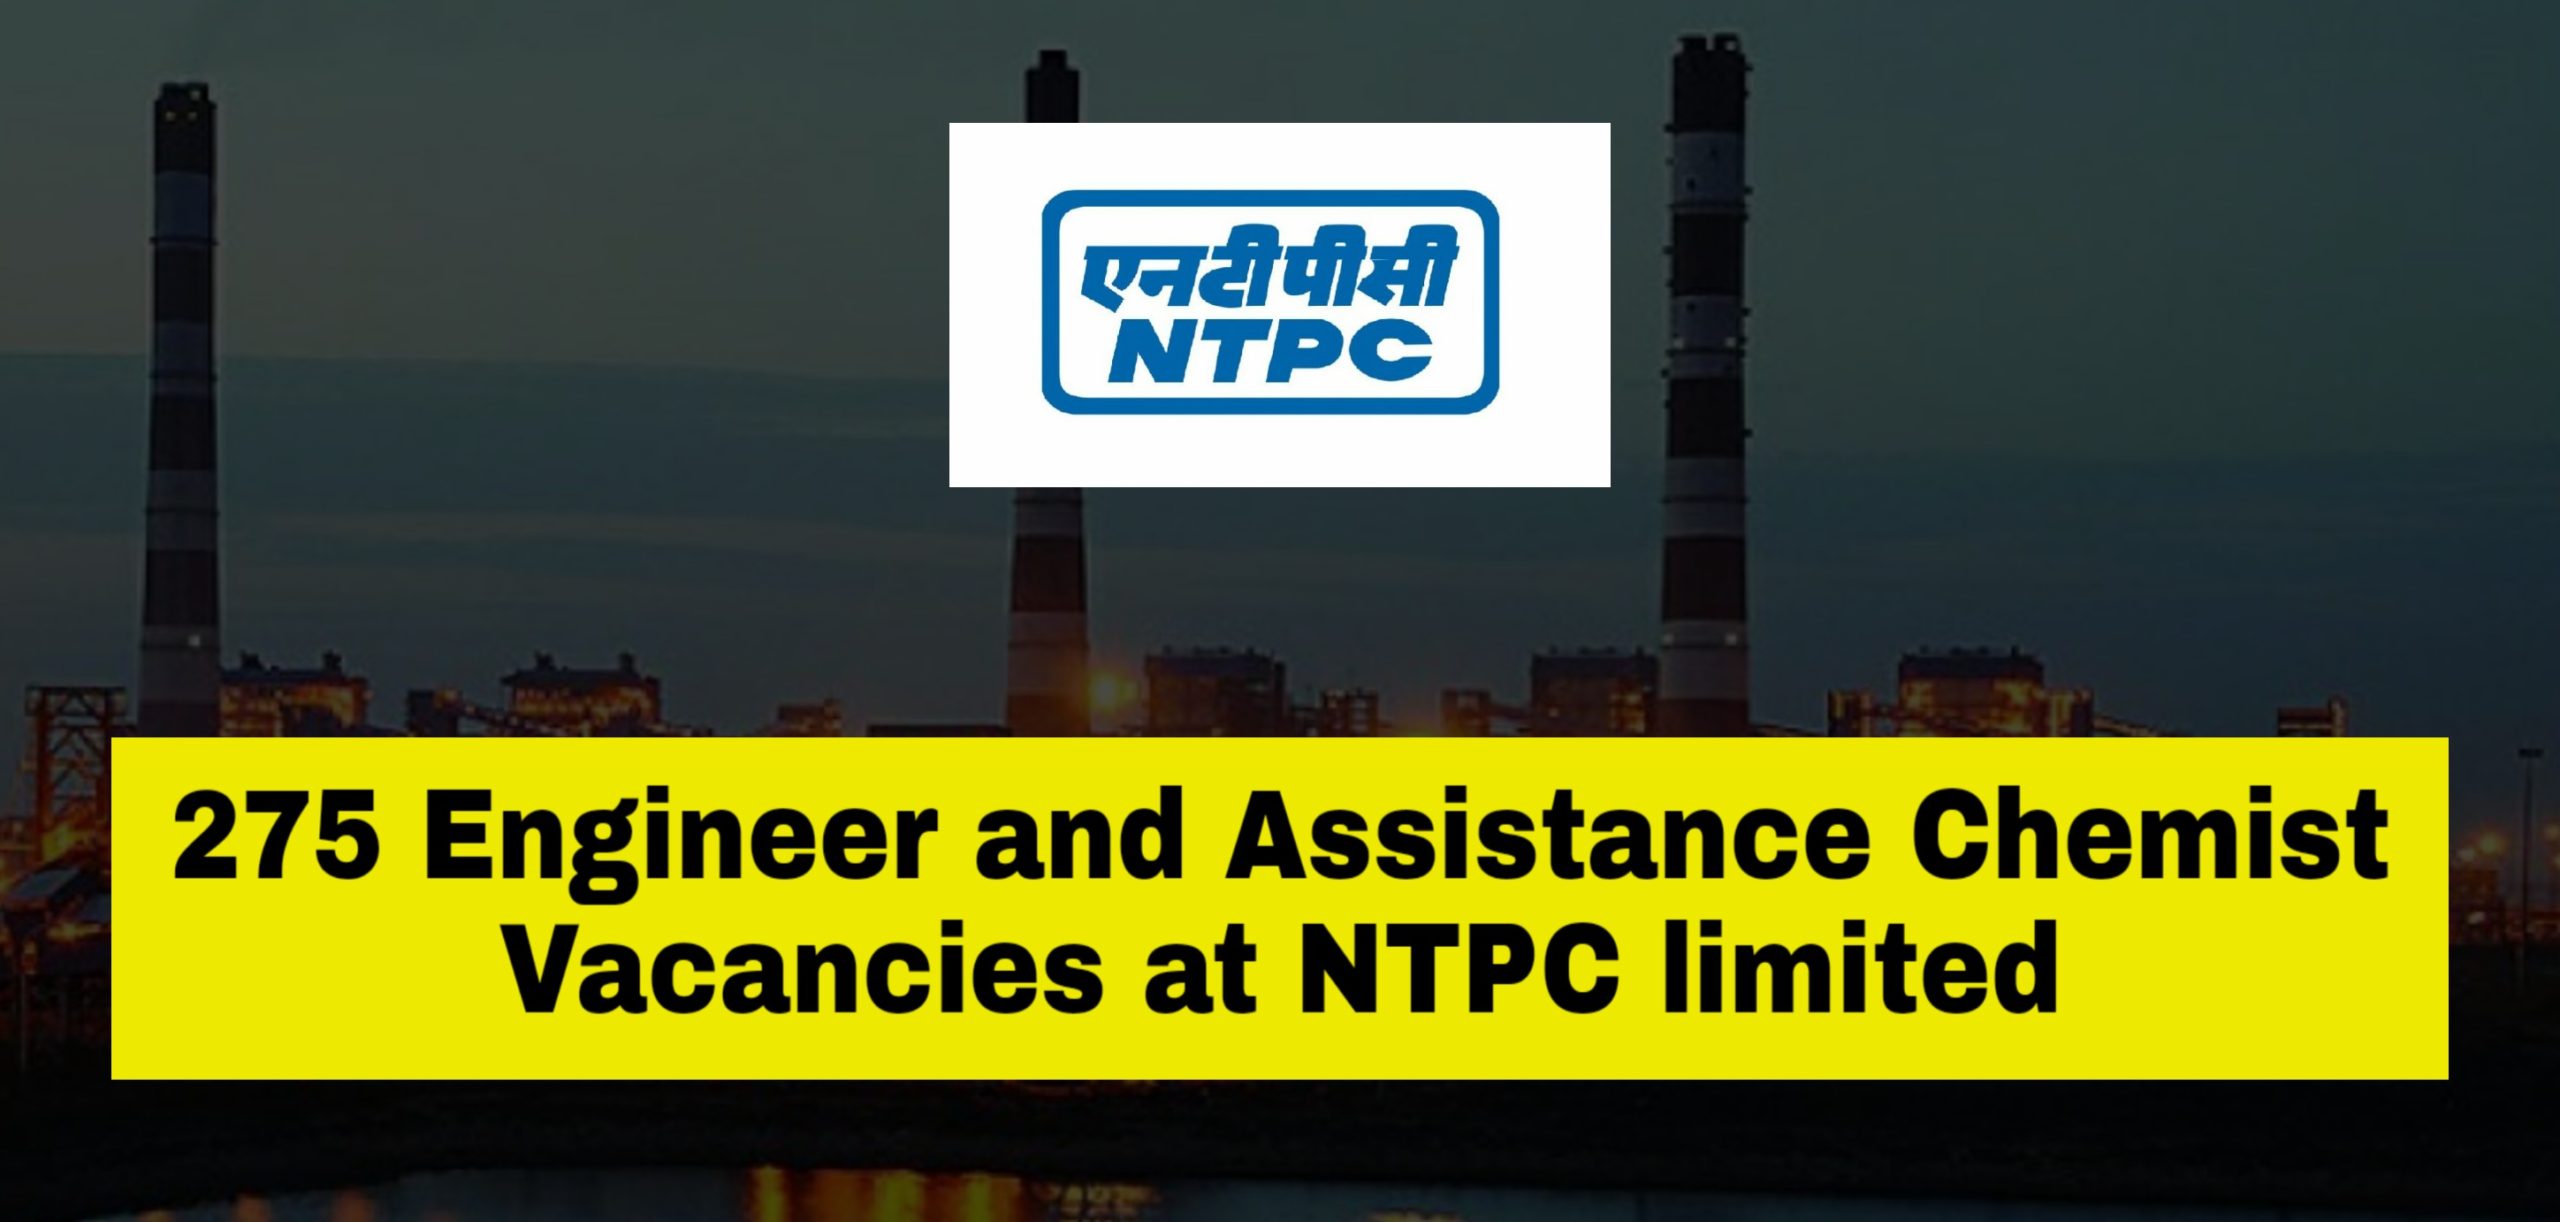 275 Engineer and Assistance Chemist Job Vacancies at NTPC limited